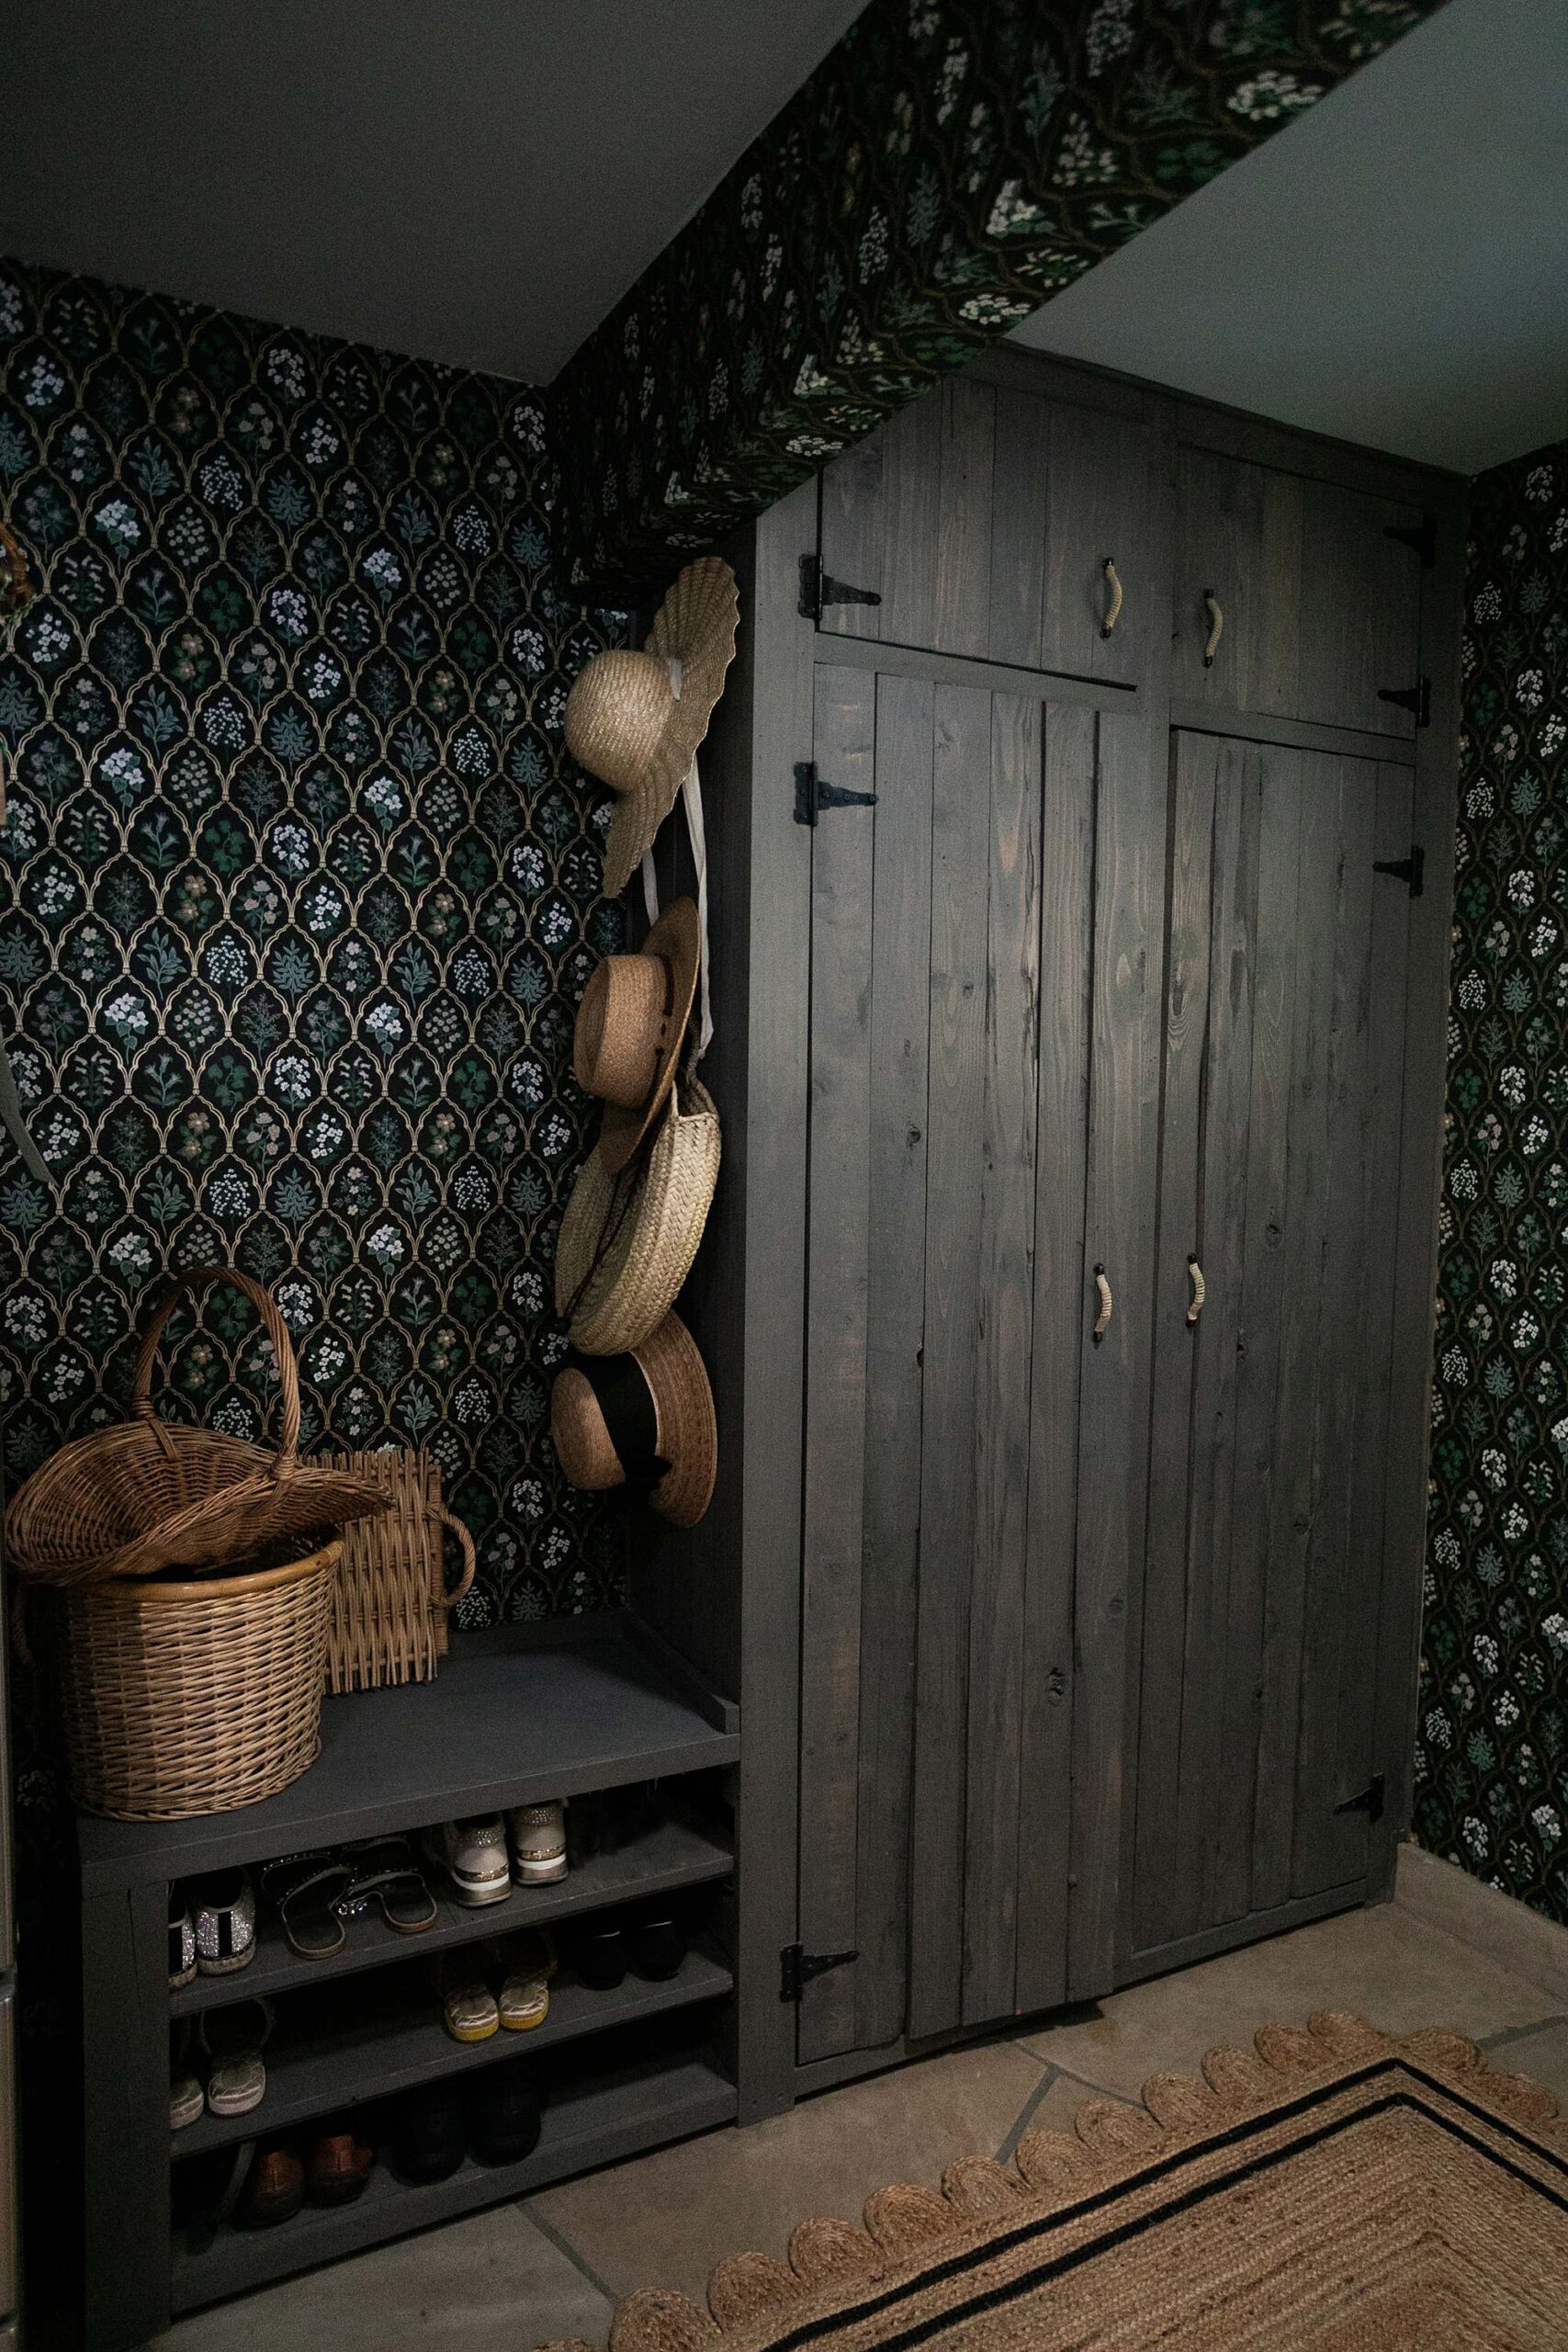 English Countryside Inspired Laundry Mud Room with Dark Wallpaper